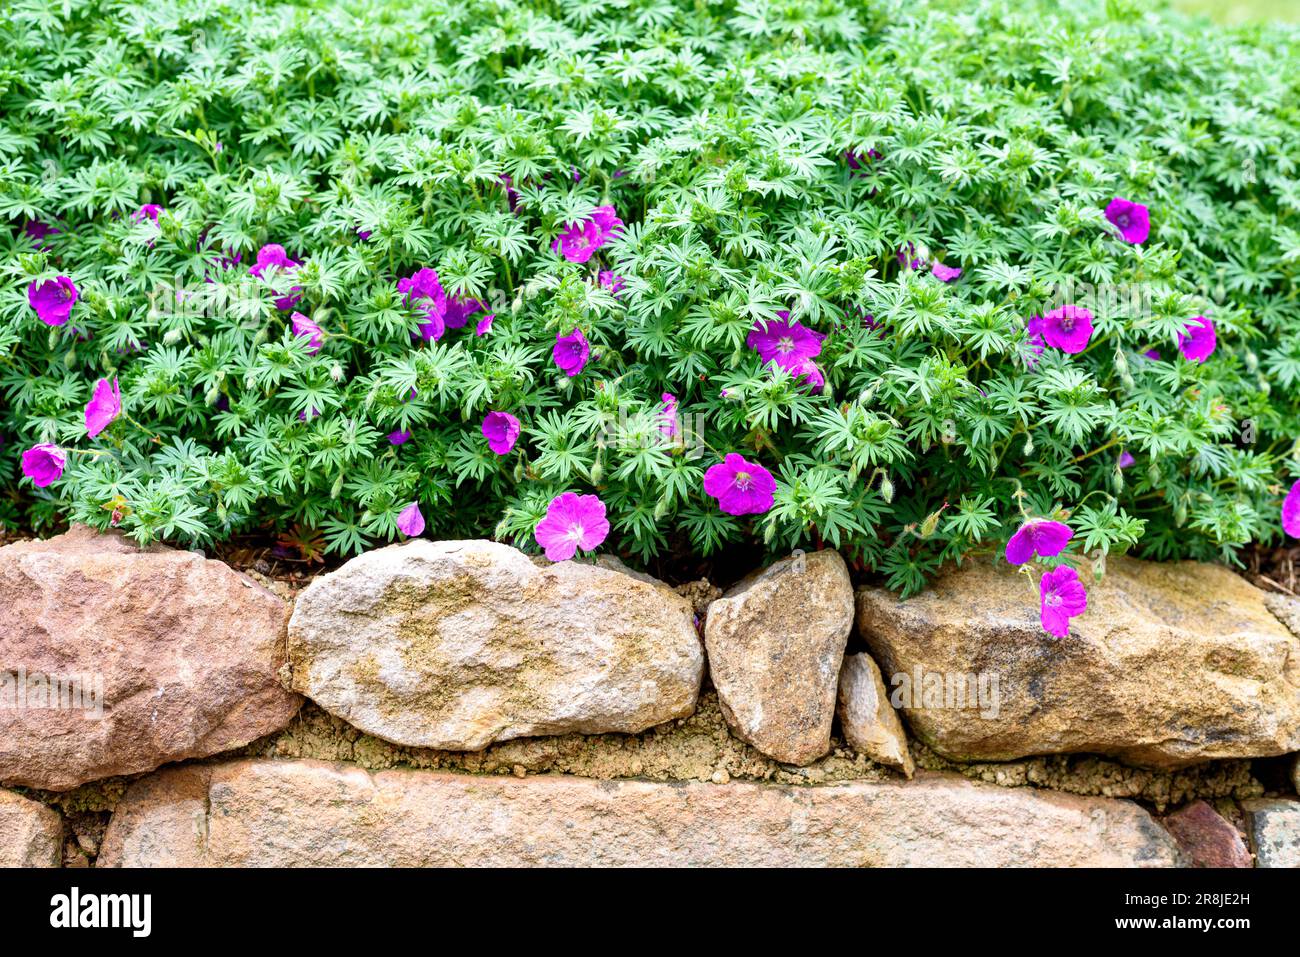 Geranium on the stone wall. Geranium is a genus of 422 species of annual, biennial, and perennial plants that are commonly known as geraniums or crane Stock Photo